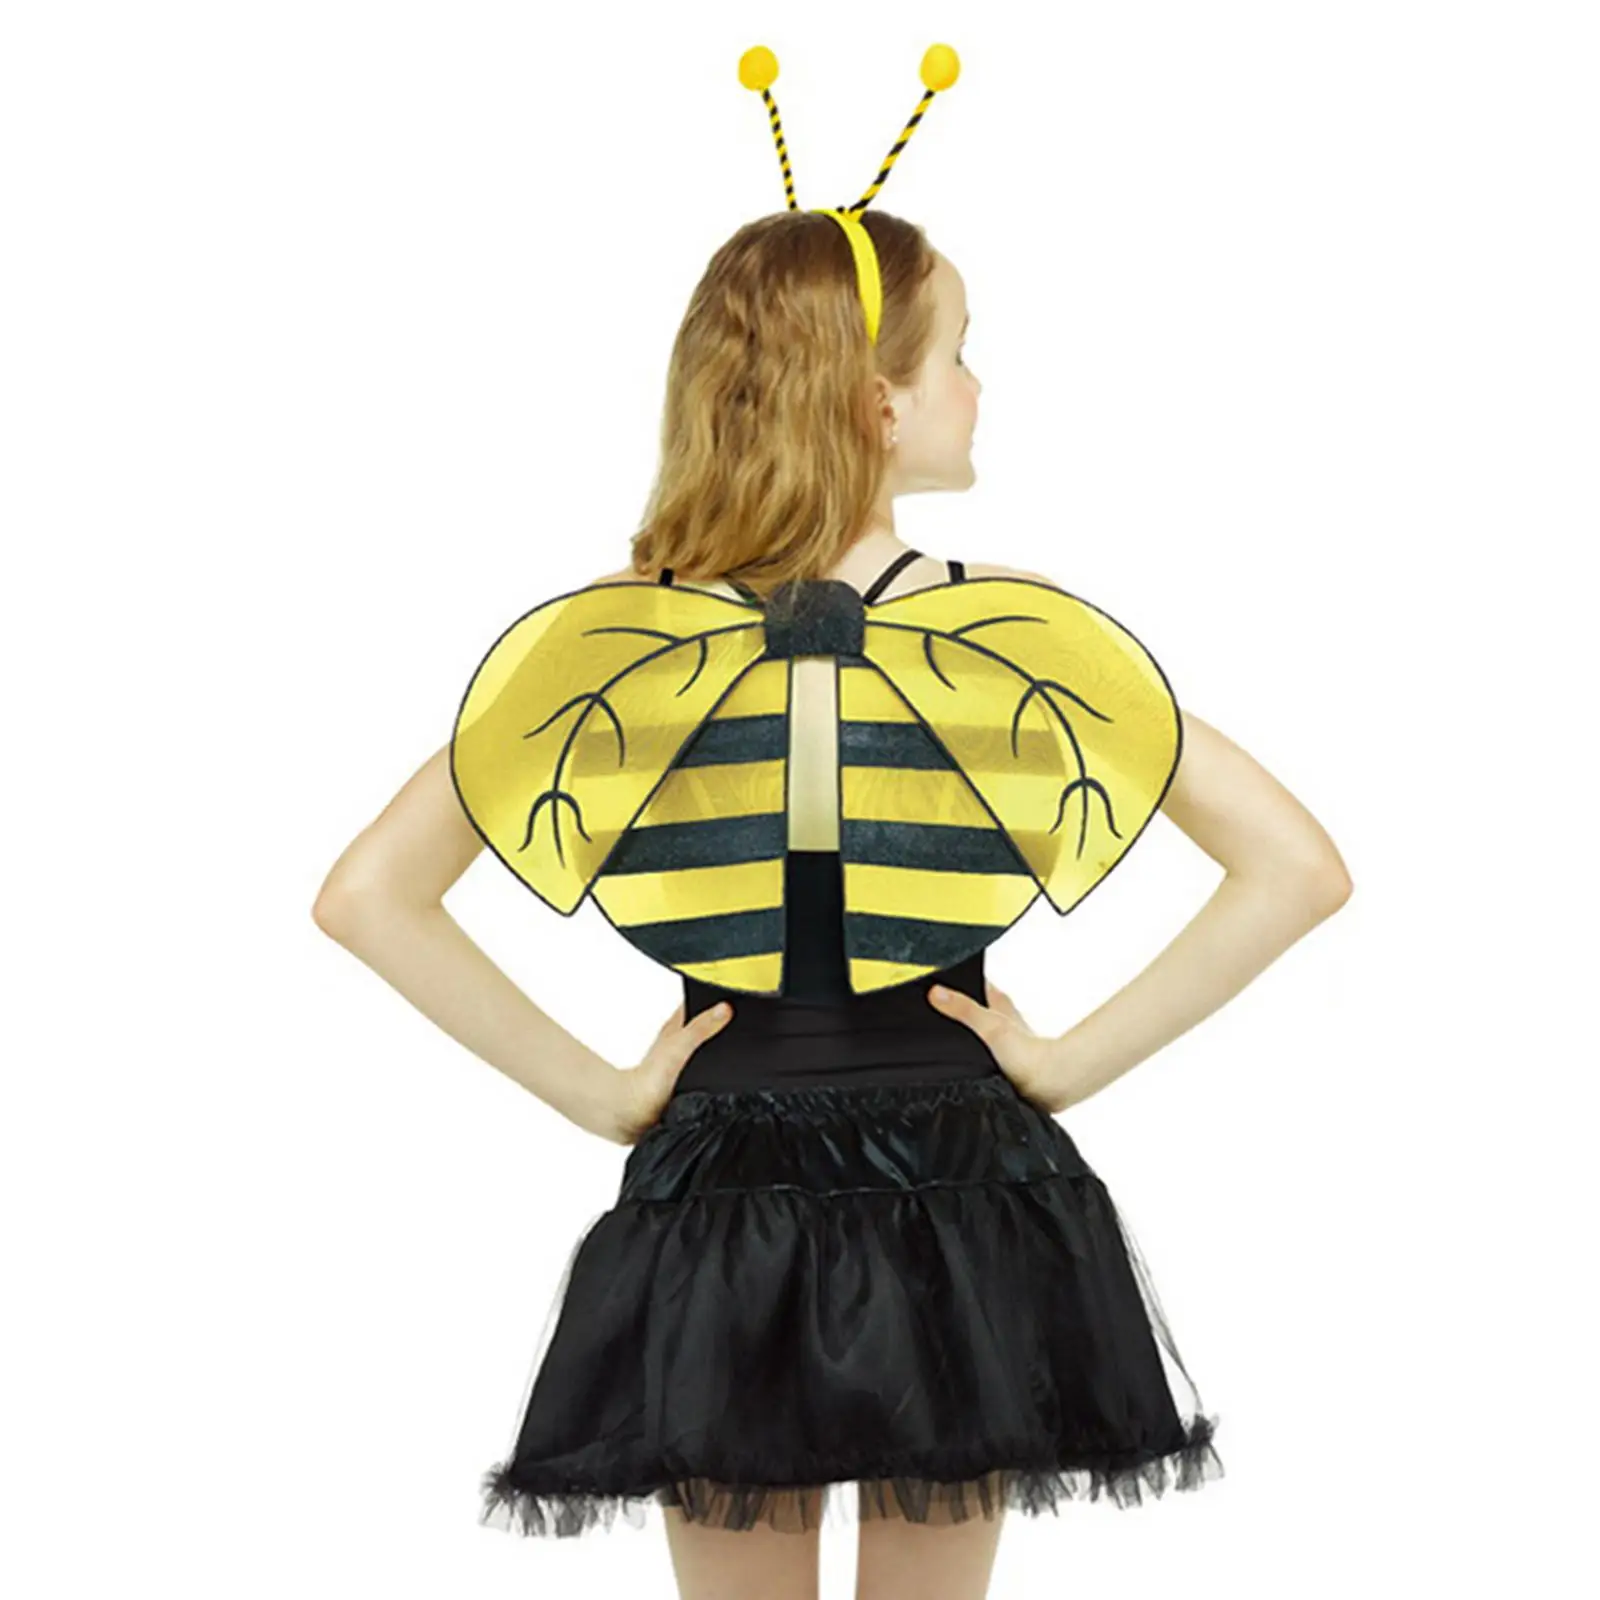 Bee Costume Kit Women Photo Props Cosplay Headband Fairy Wing Cv Masquerade Party Favors Role Festival Kids Girls